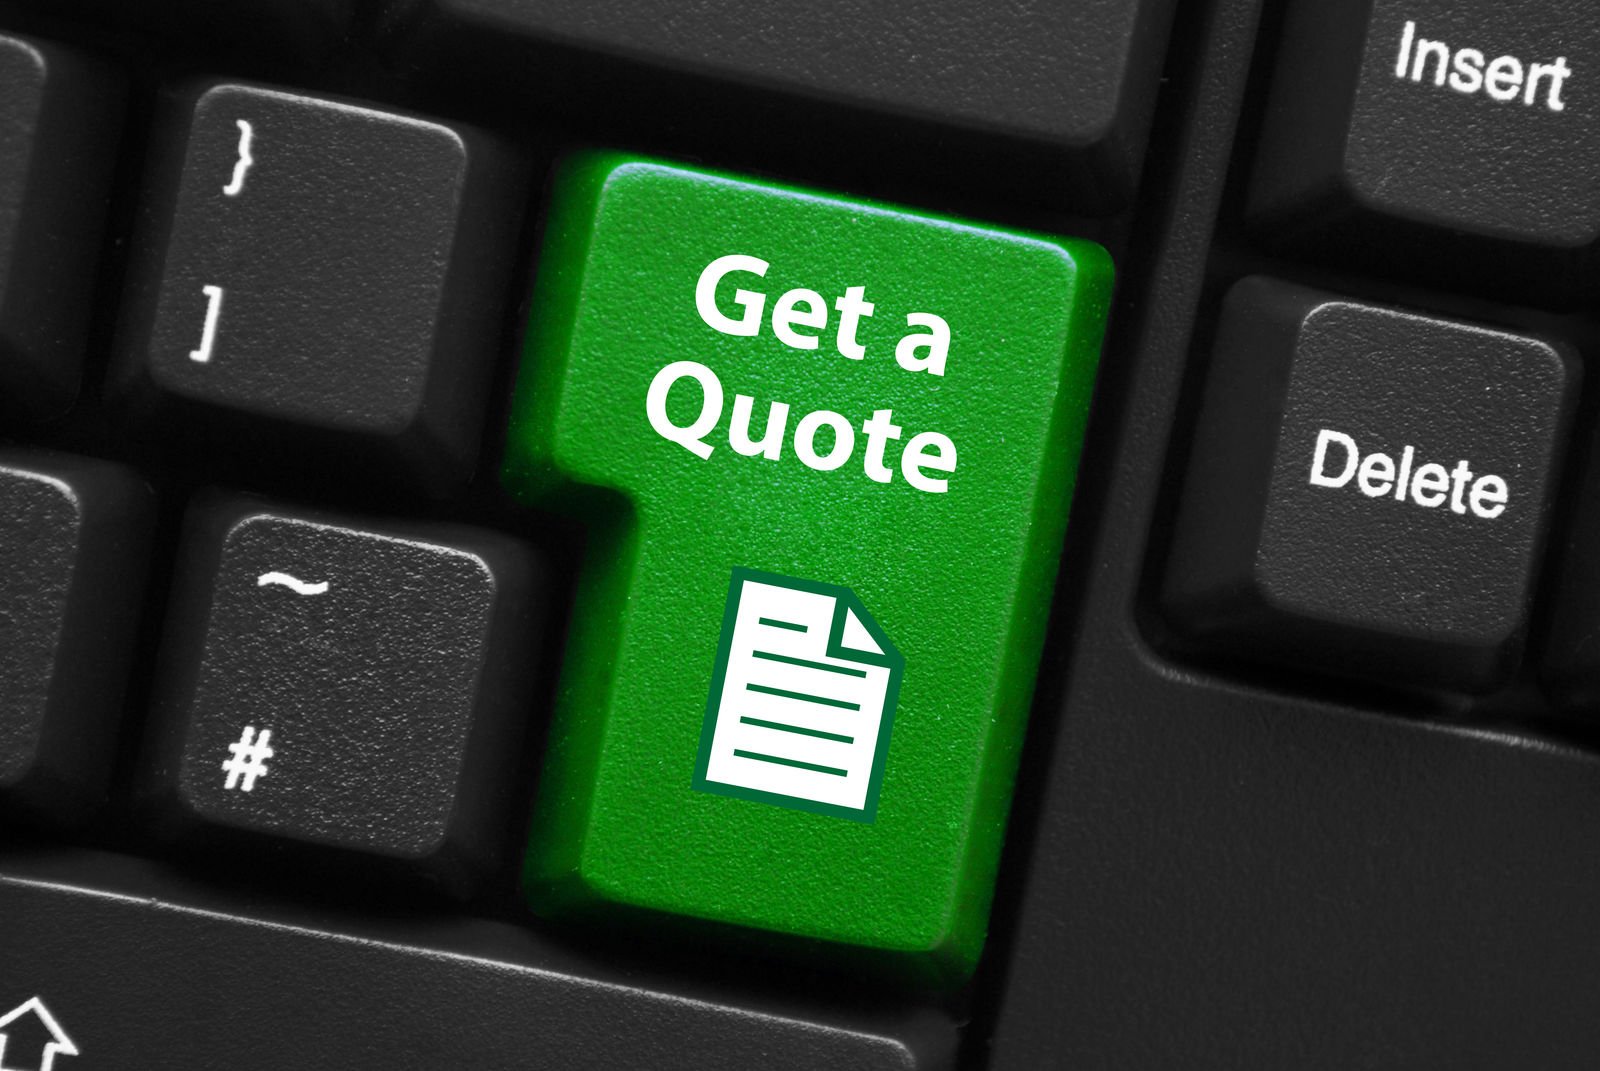 Get a quote keyboard button